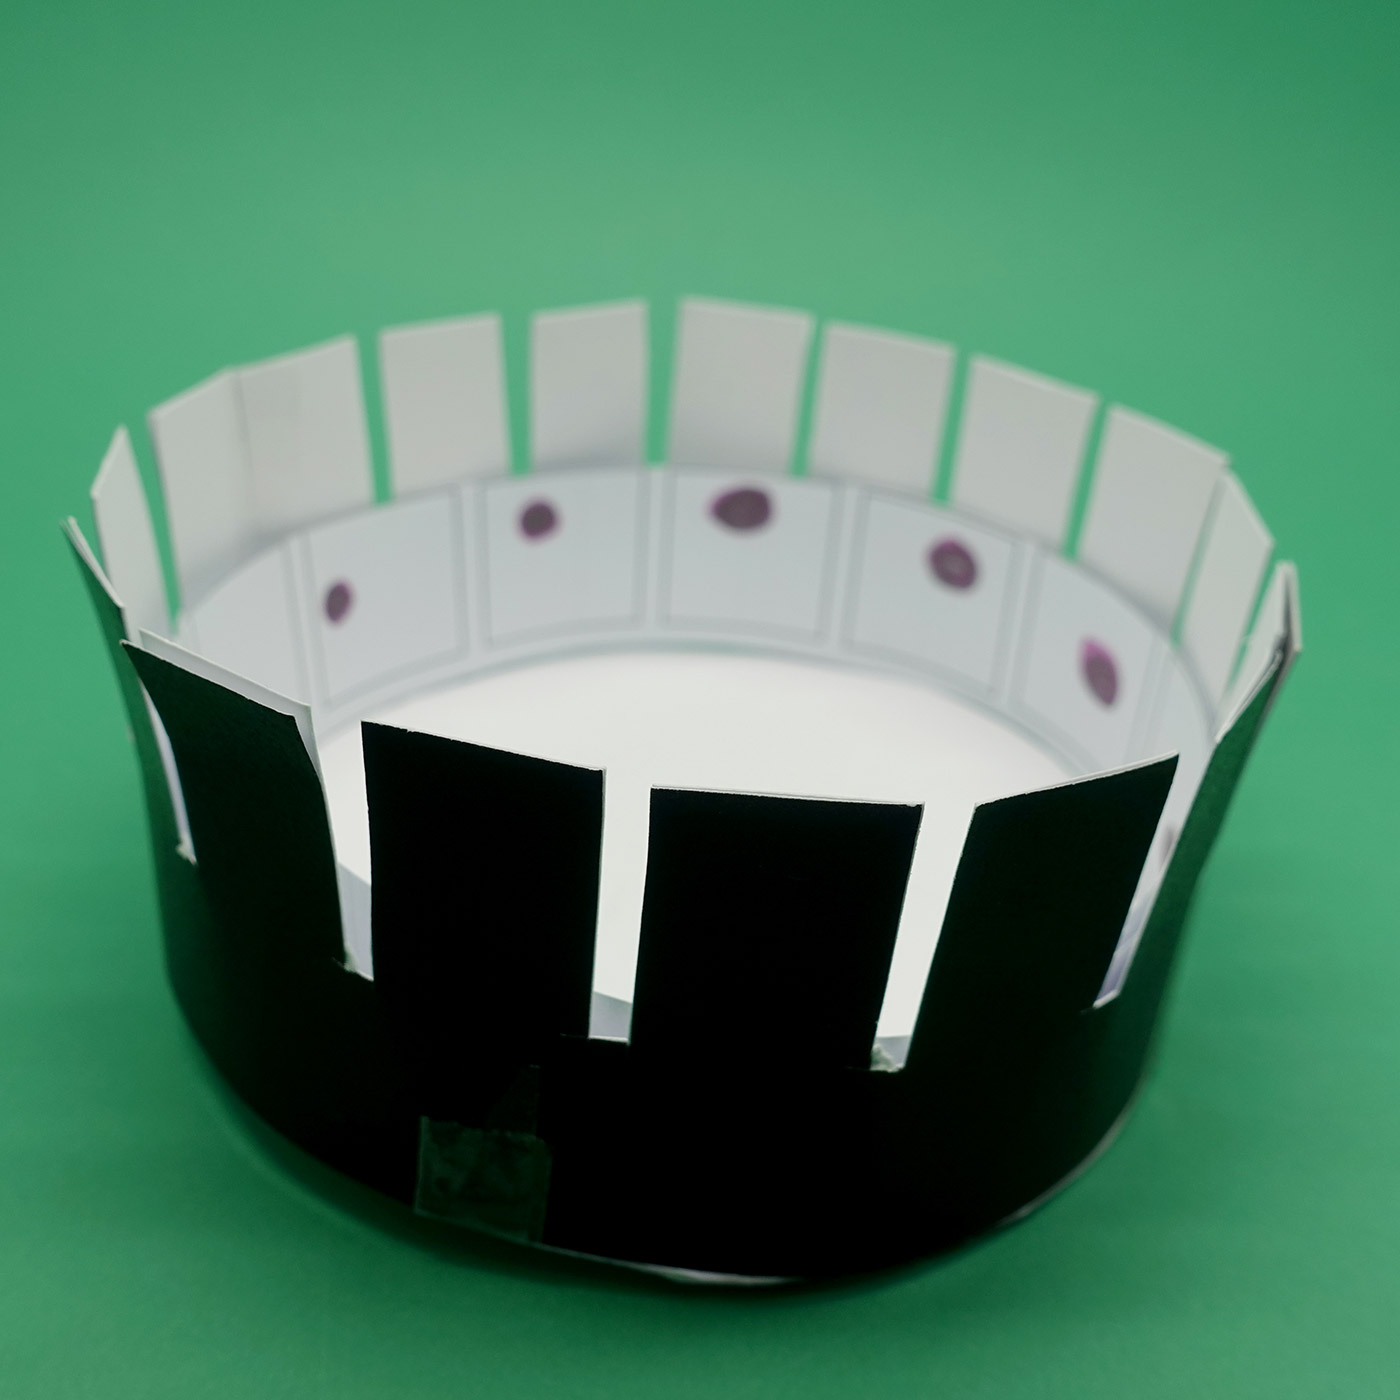 Model of a zoetrope, showing a series of dots drawn on the inside.